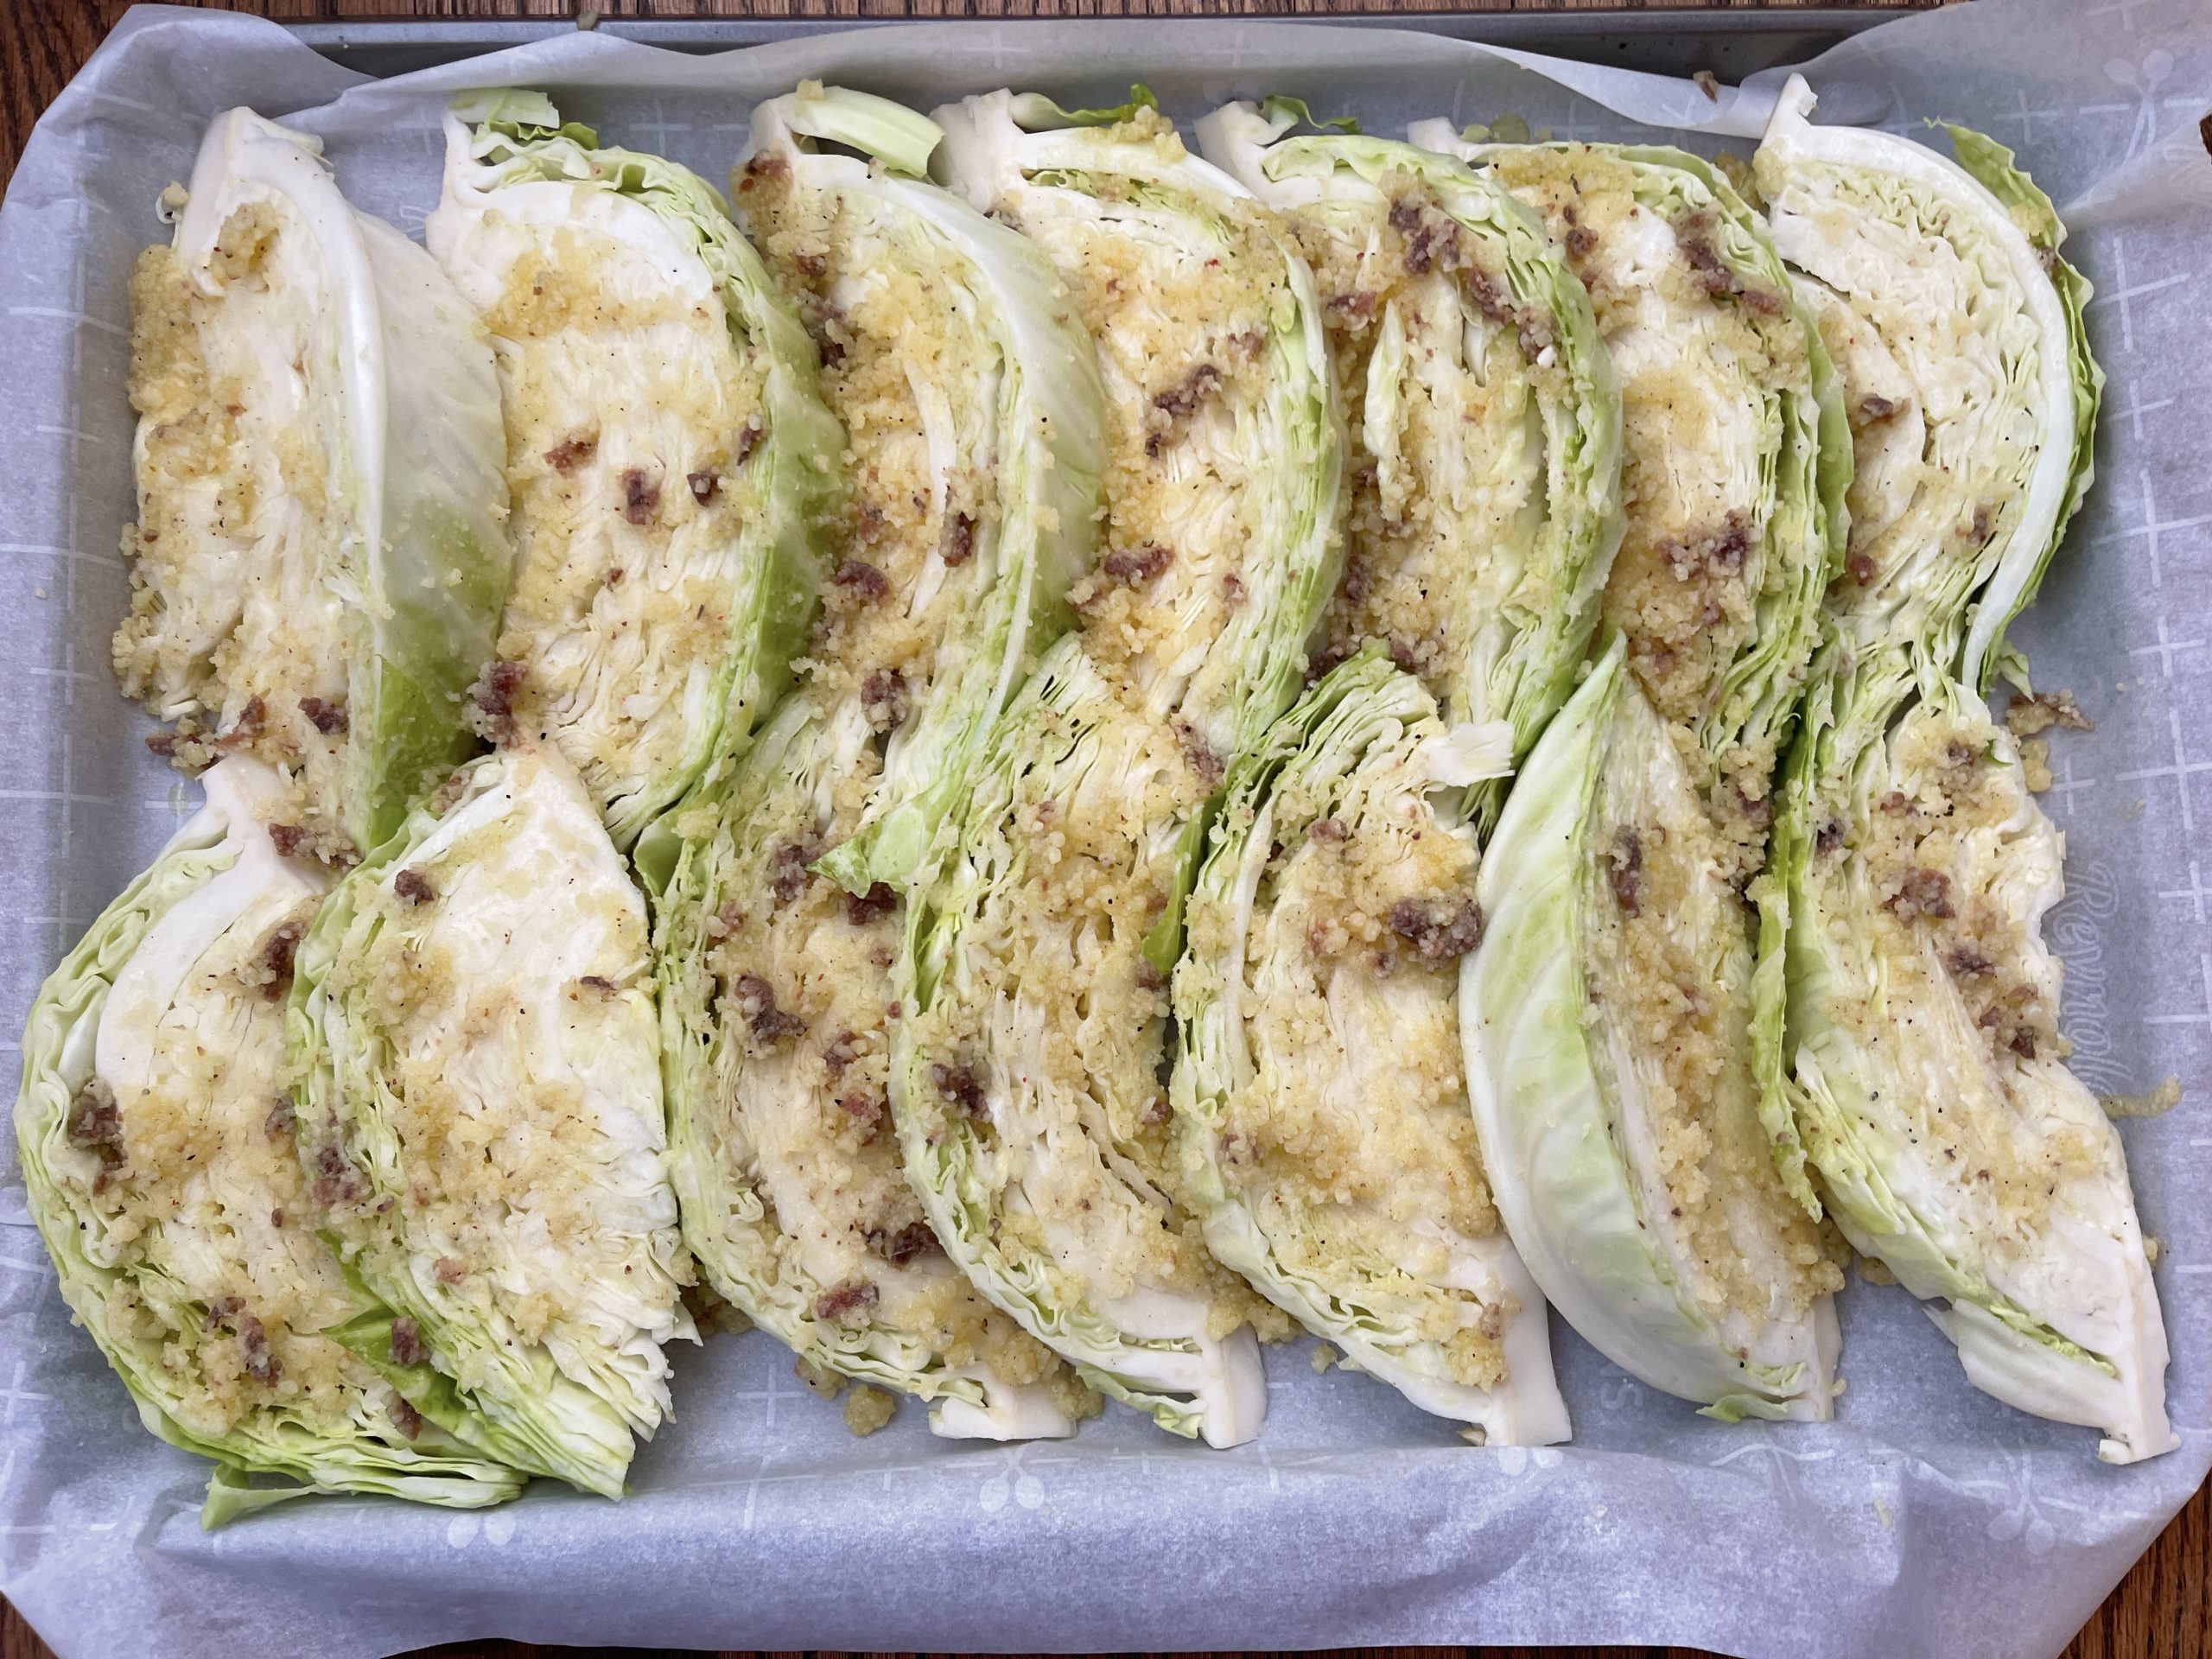 massage paste into all of the crevices of the cabbage wedges and drizzle with more olive oil